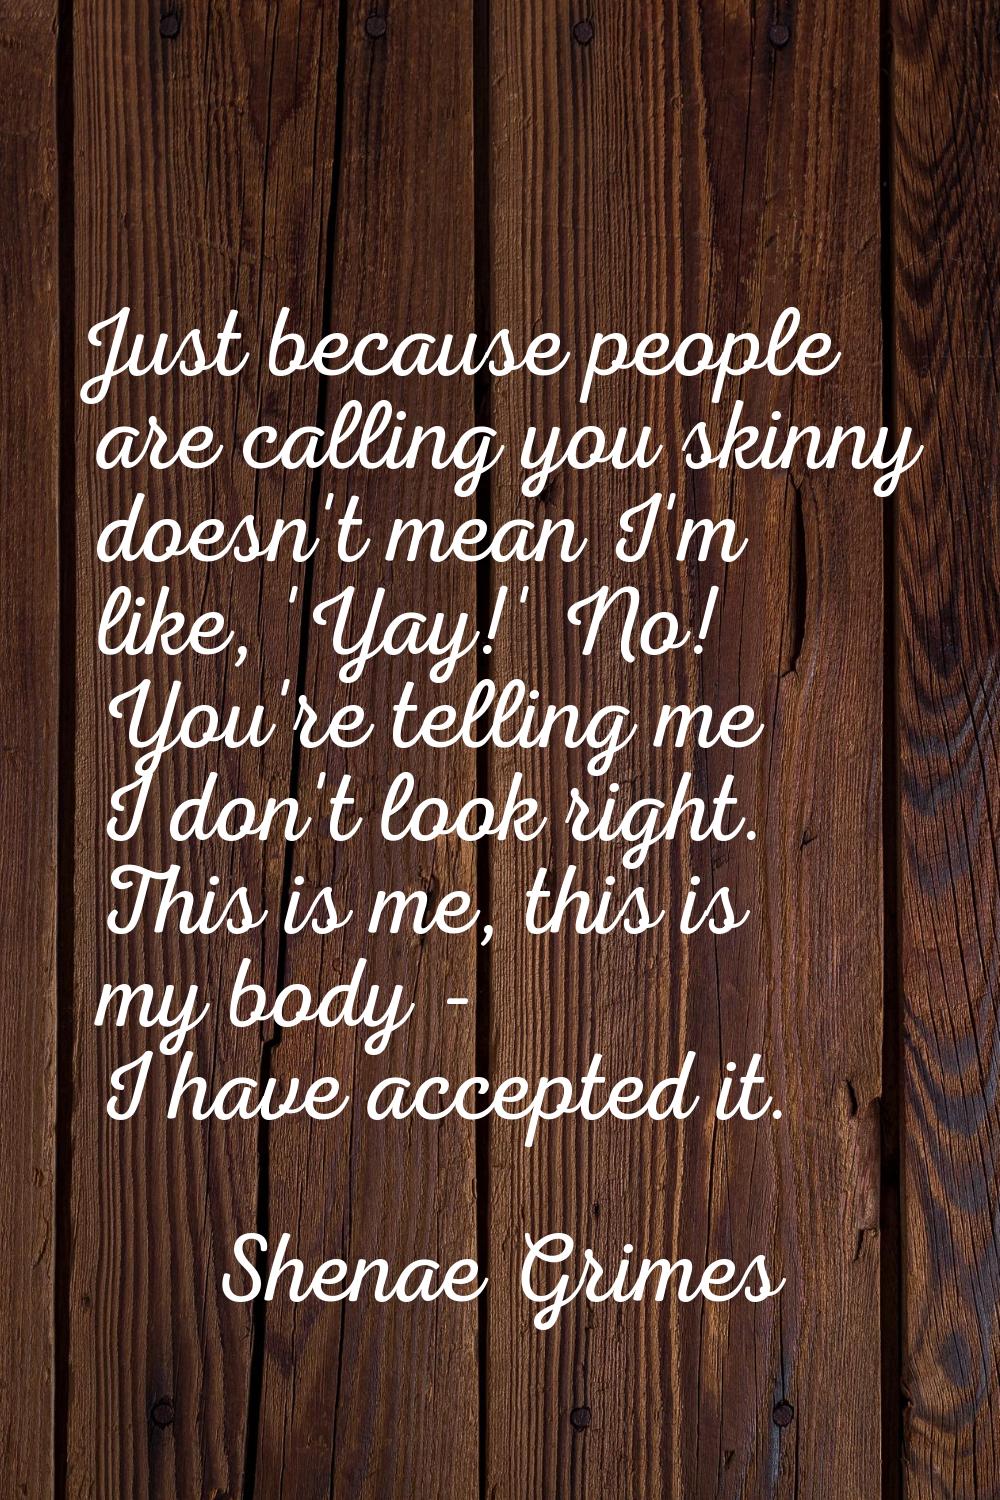 Just because people are calling you skinny doesn't mean I'm like, 'Yay!' No! You're telling me I do